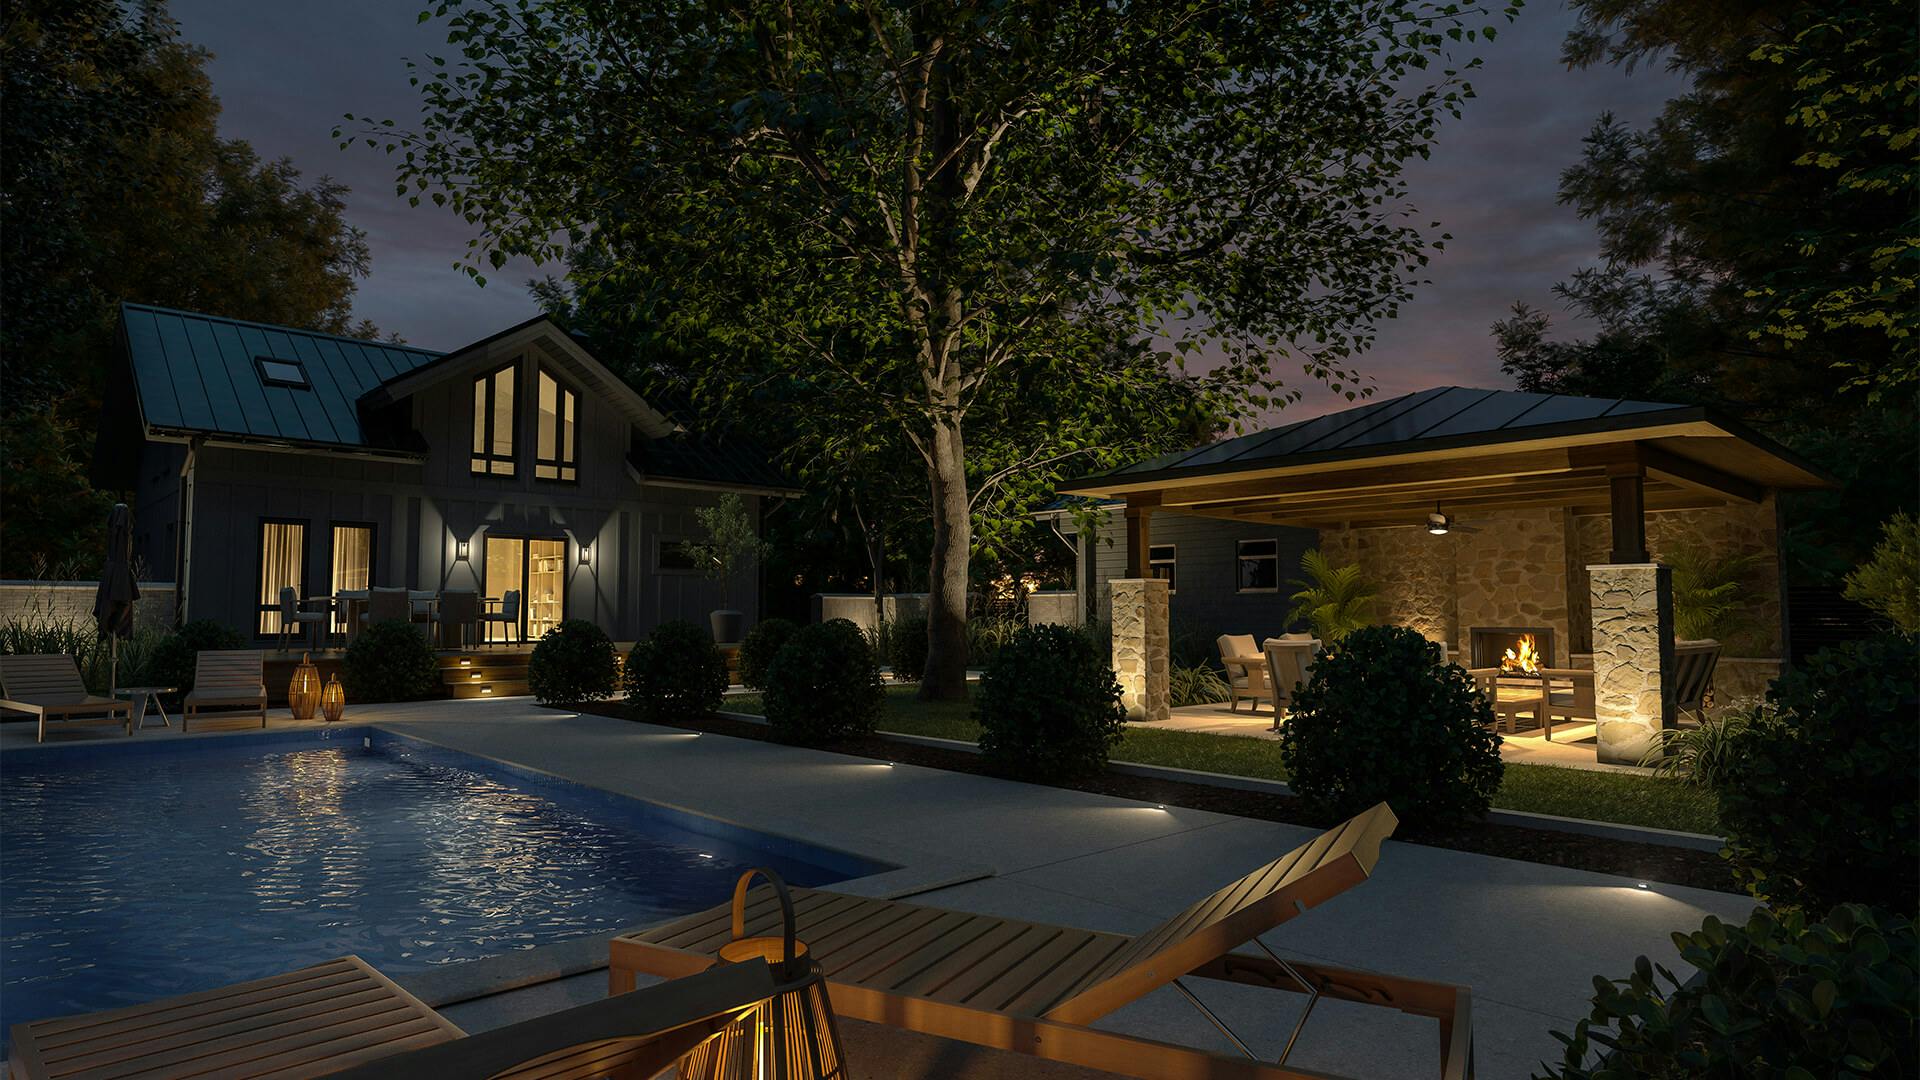 Wide shot of house with backyard pool at night with landscape lighting